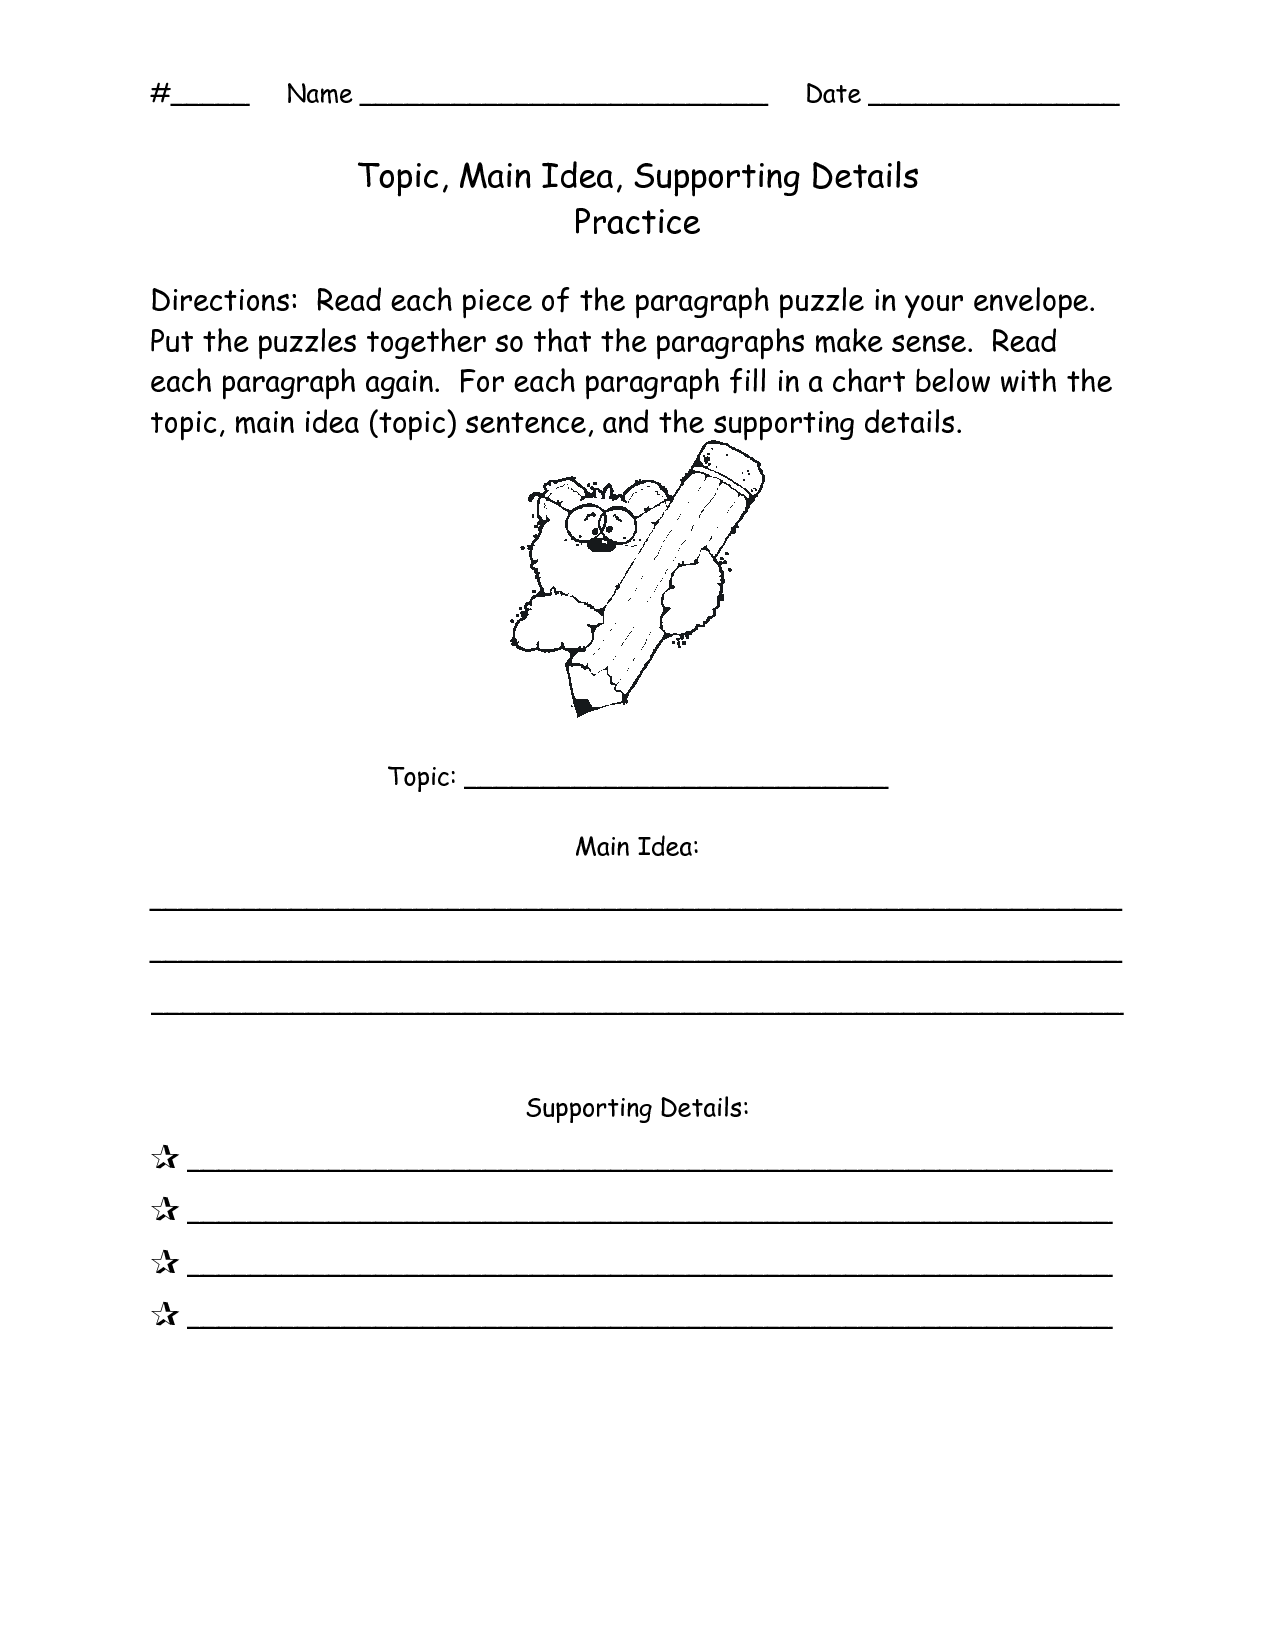 13 Best Images of Idea Supporting And Main Worksheets Details Practice  Main Idea and 